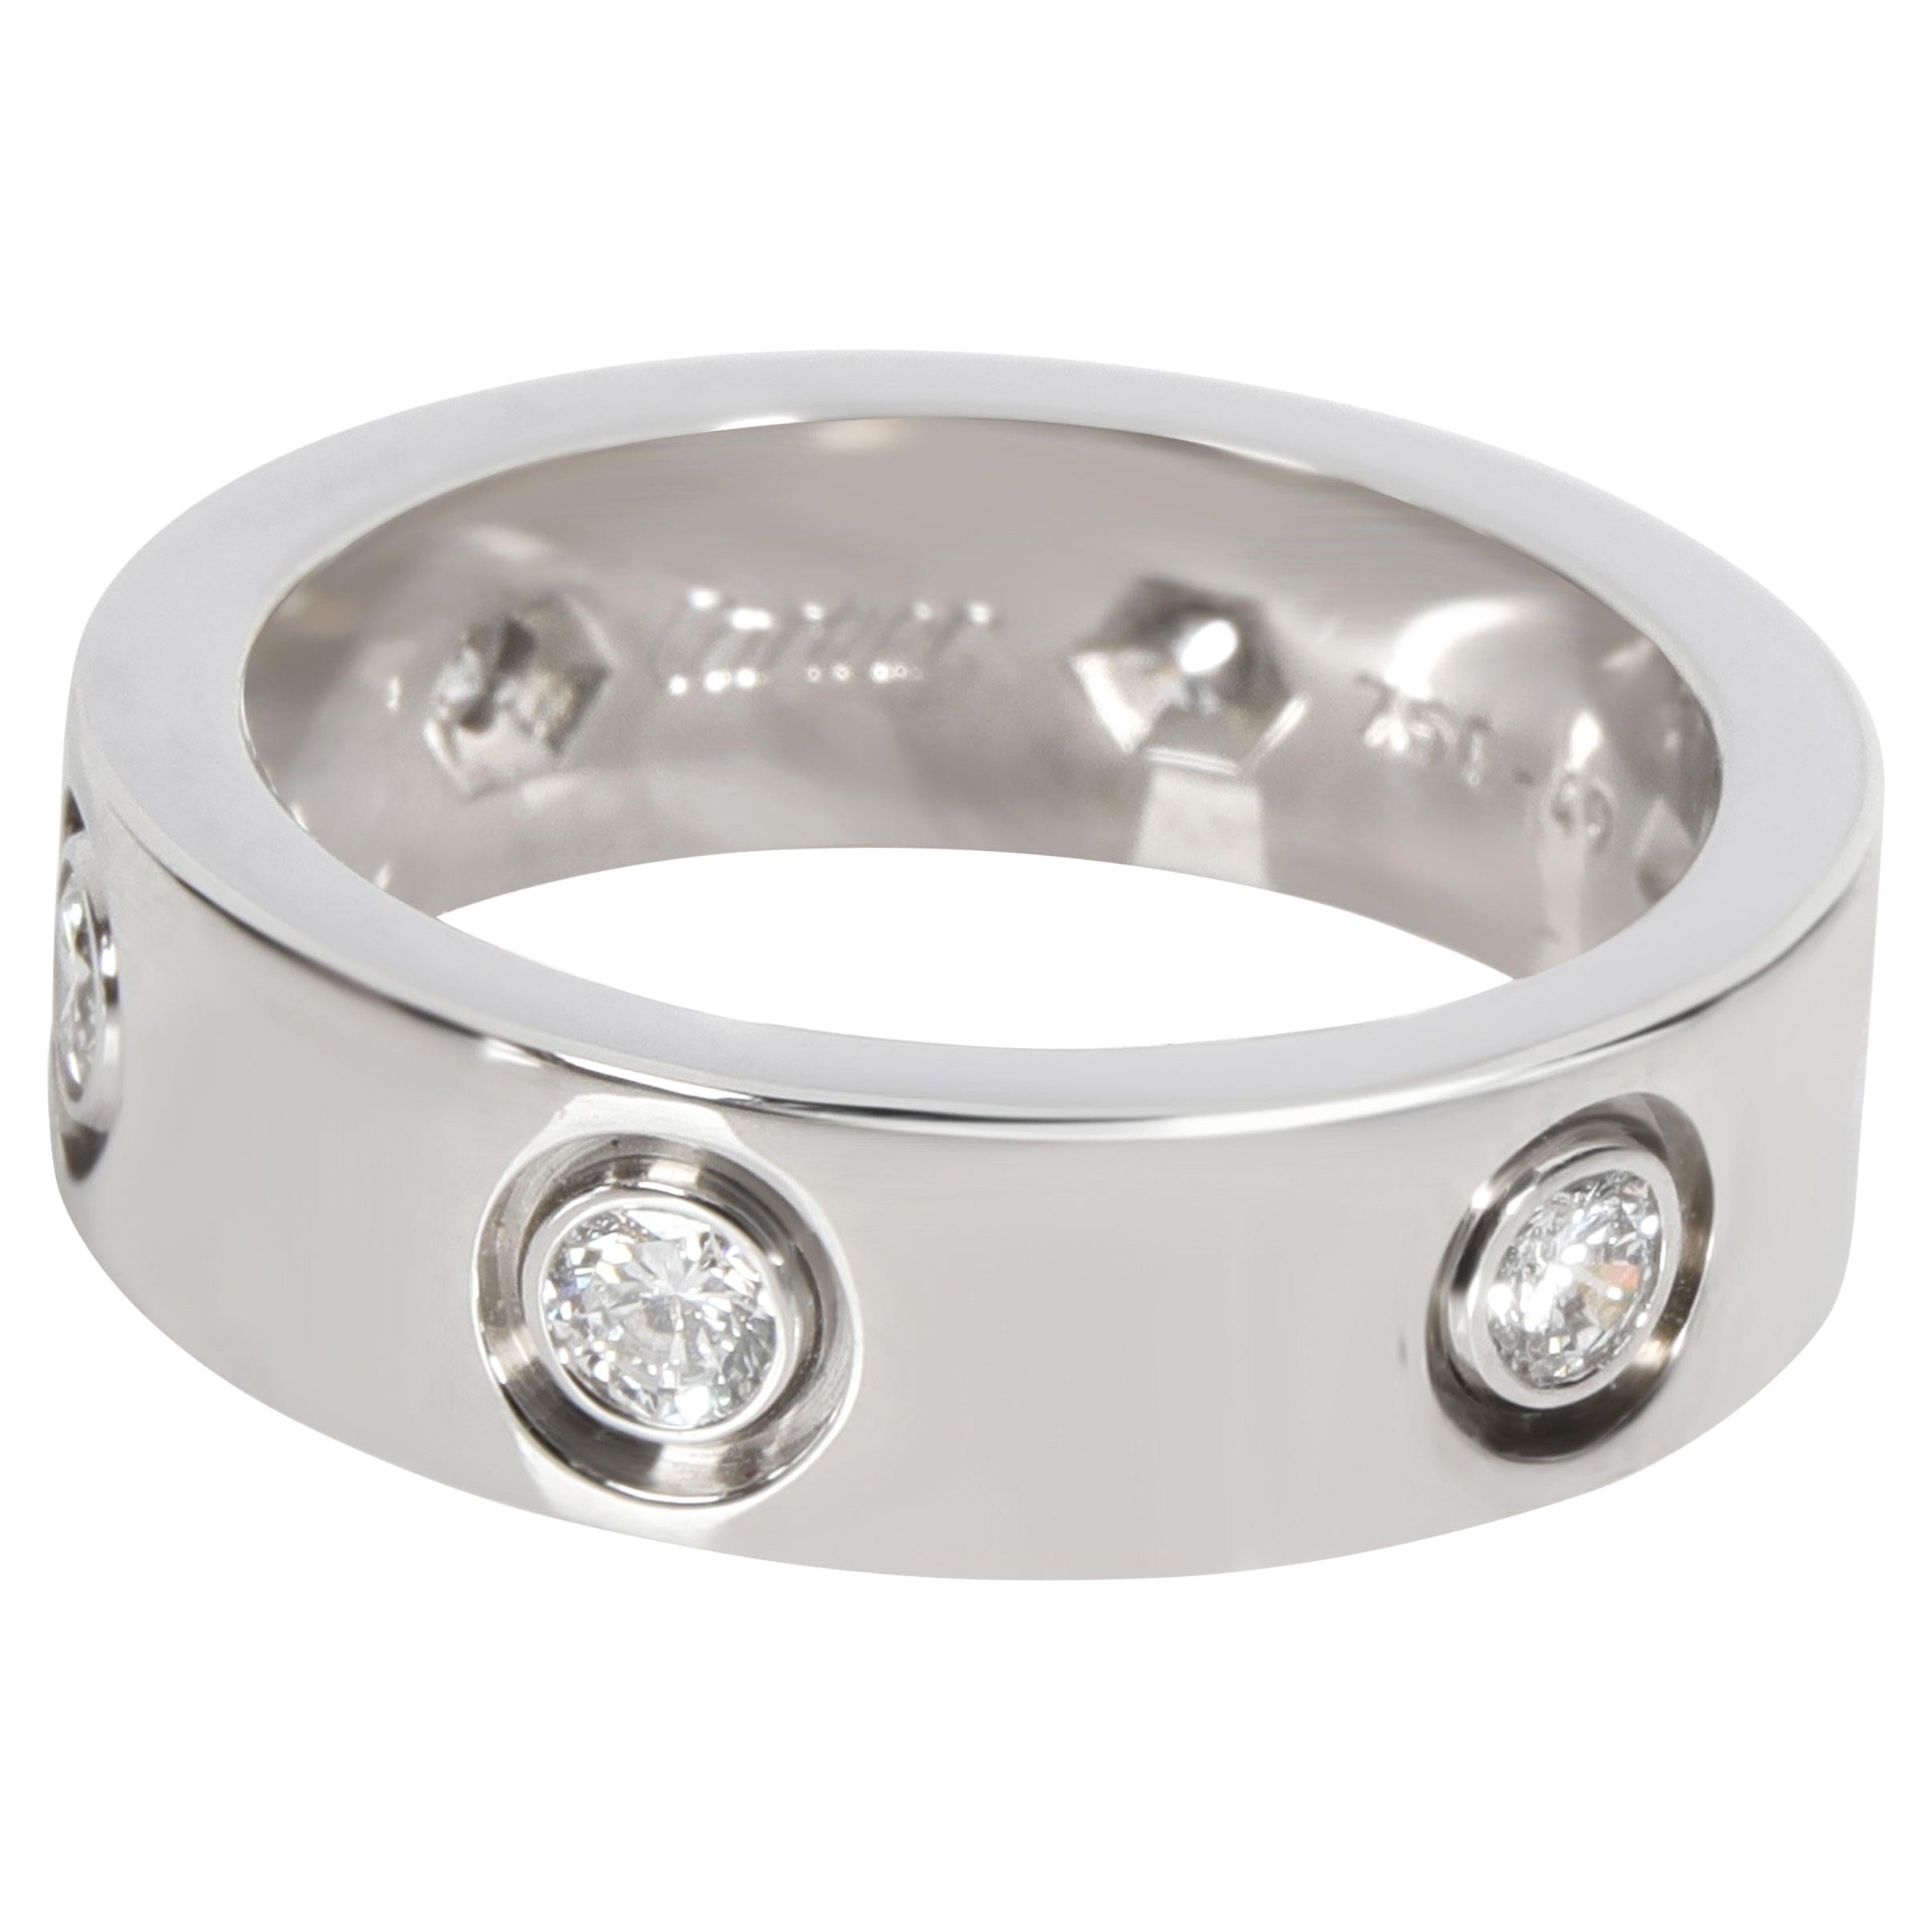 Cartier Love Diamond Band in 18K White Gold 0.46 CTW